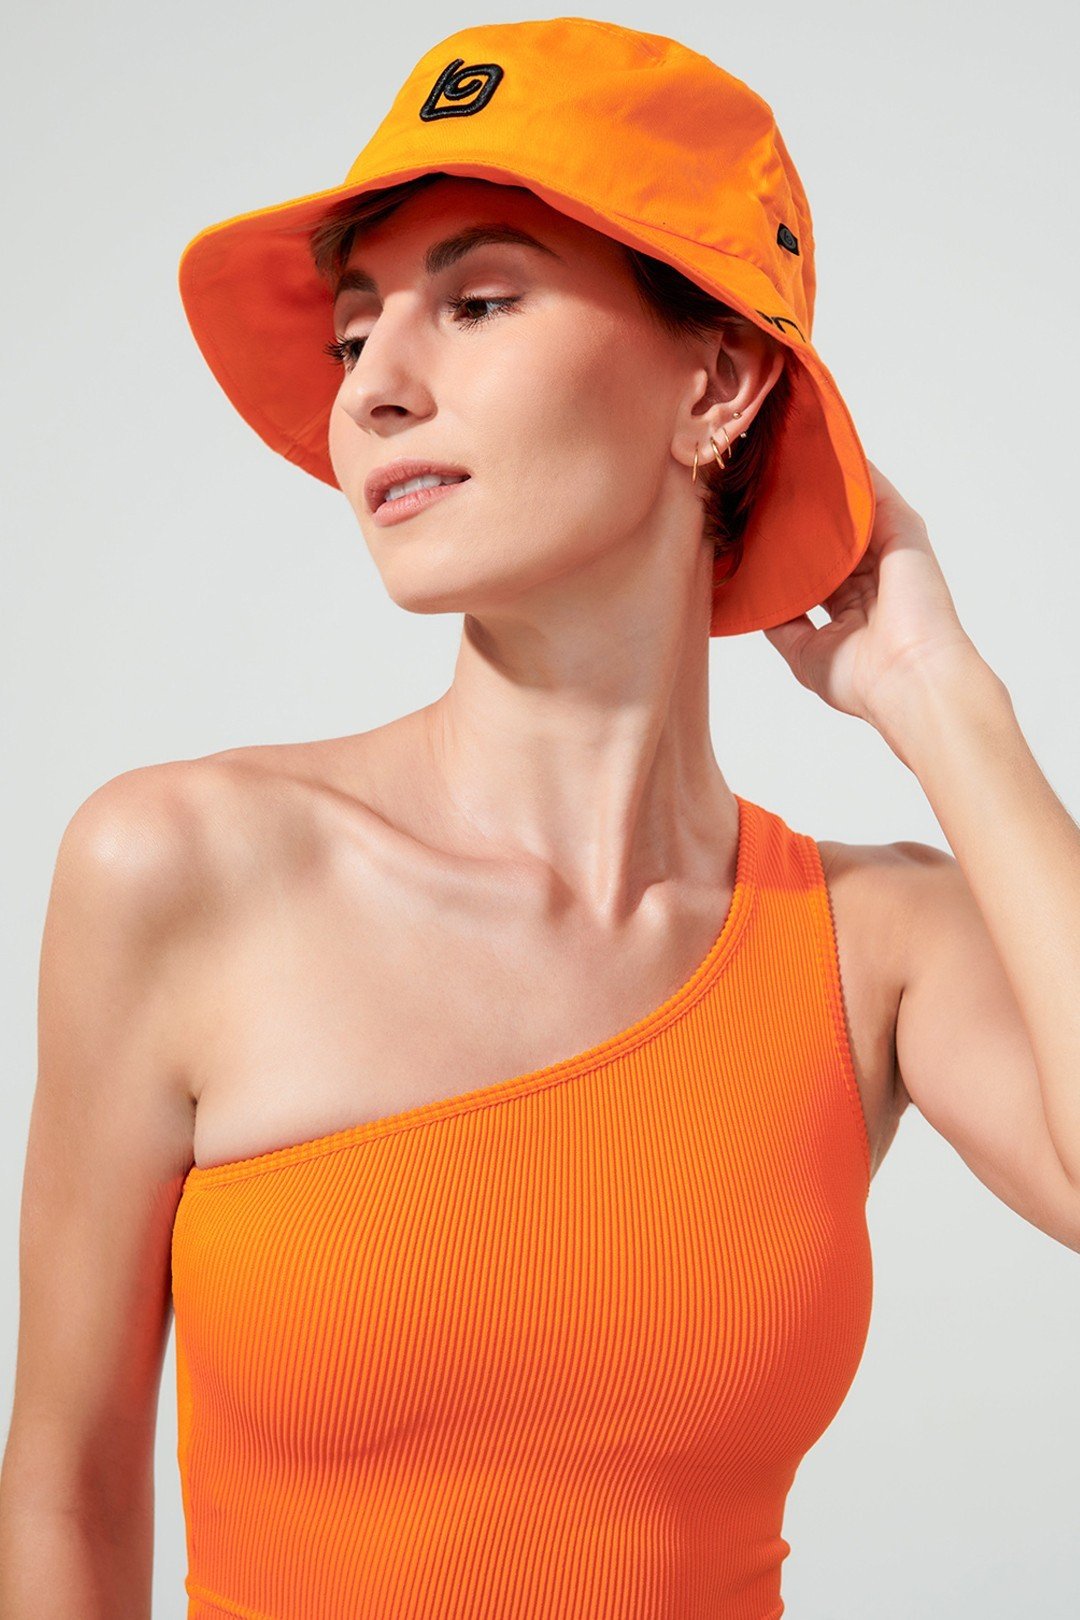 Vibrant orange Jolly bucket hat with OlaBen branding, perfect headwear for a stylish look.